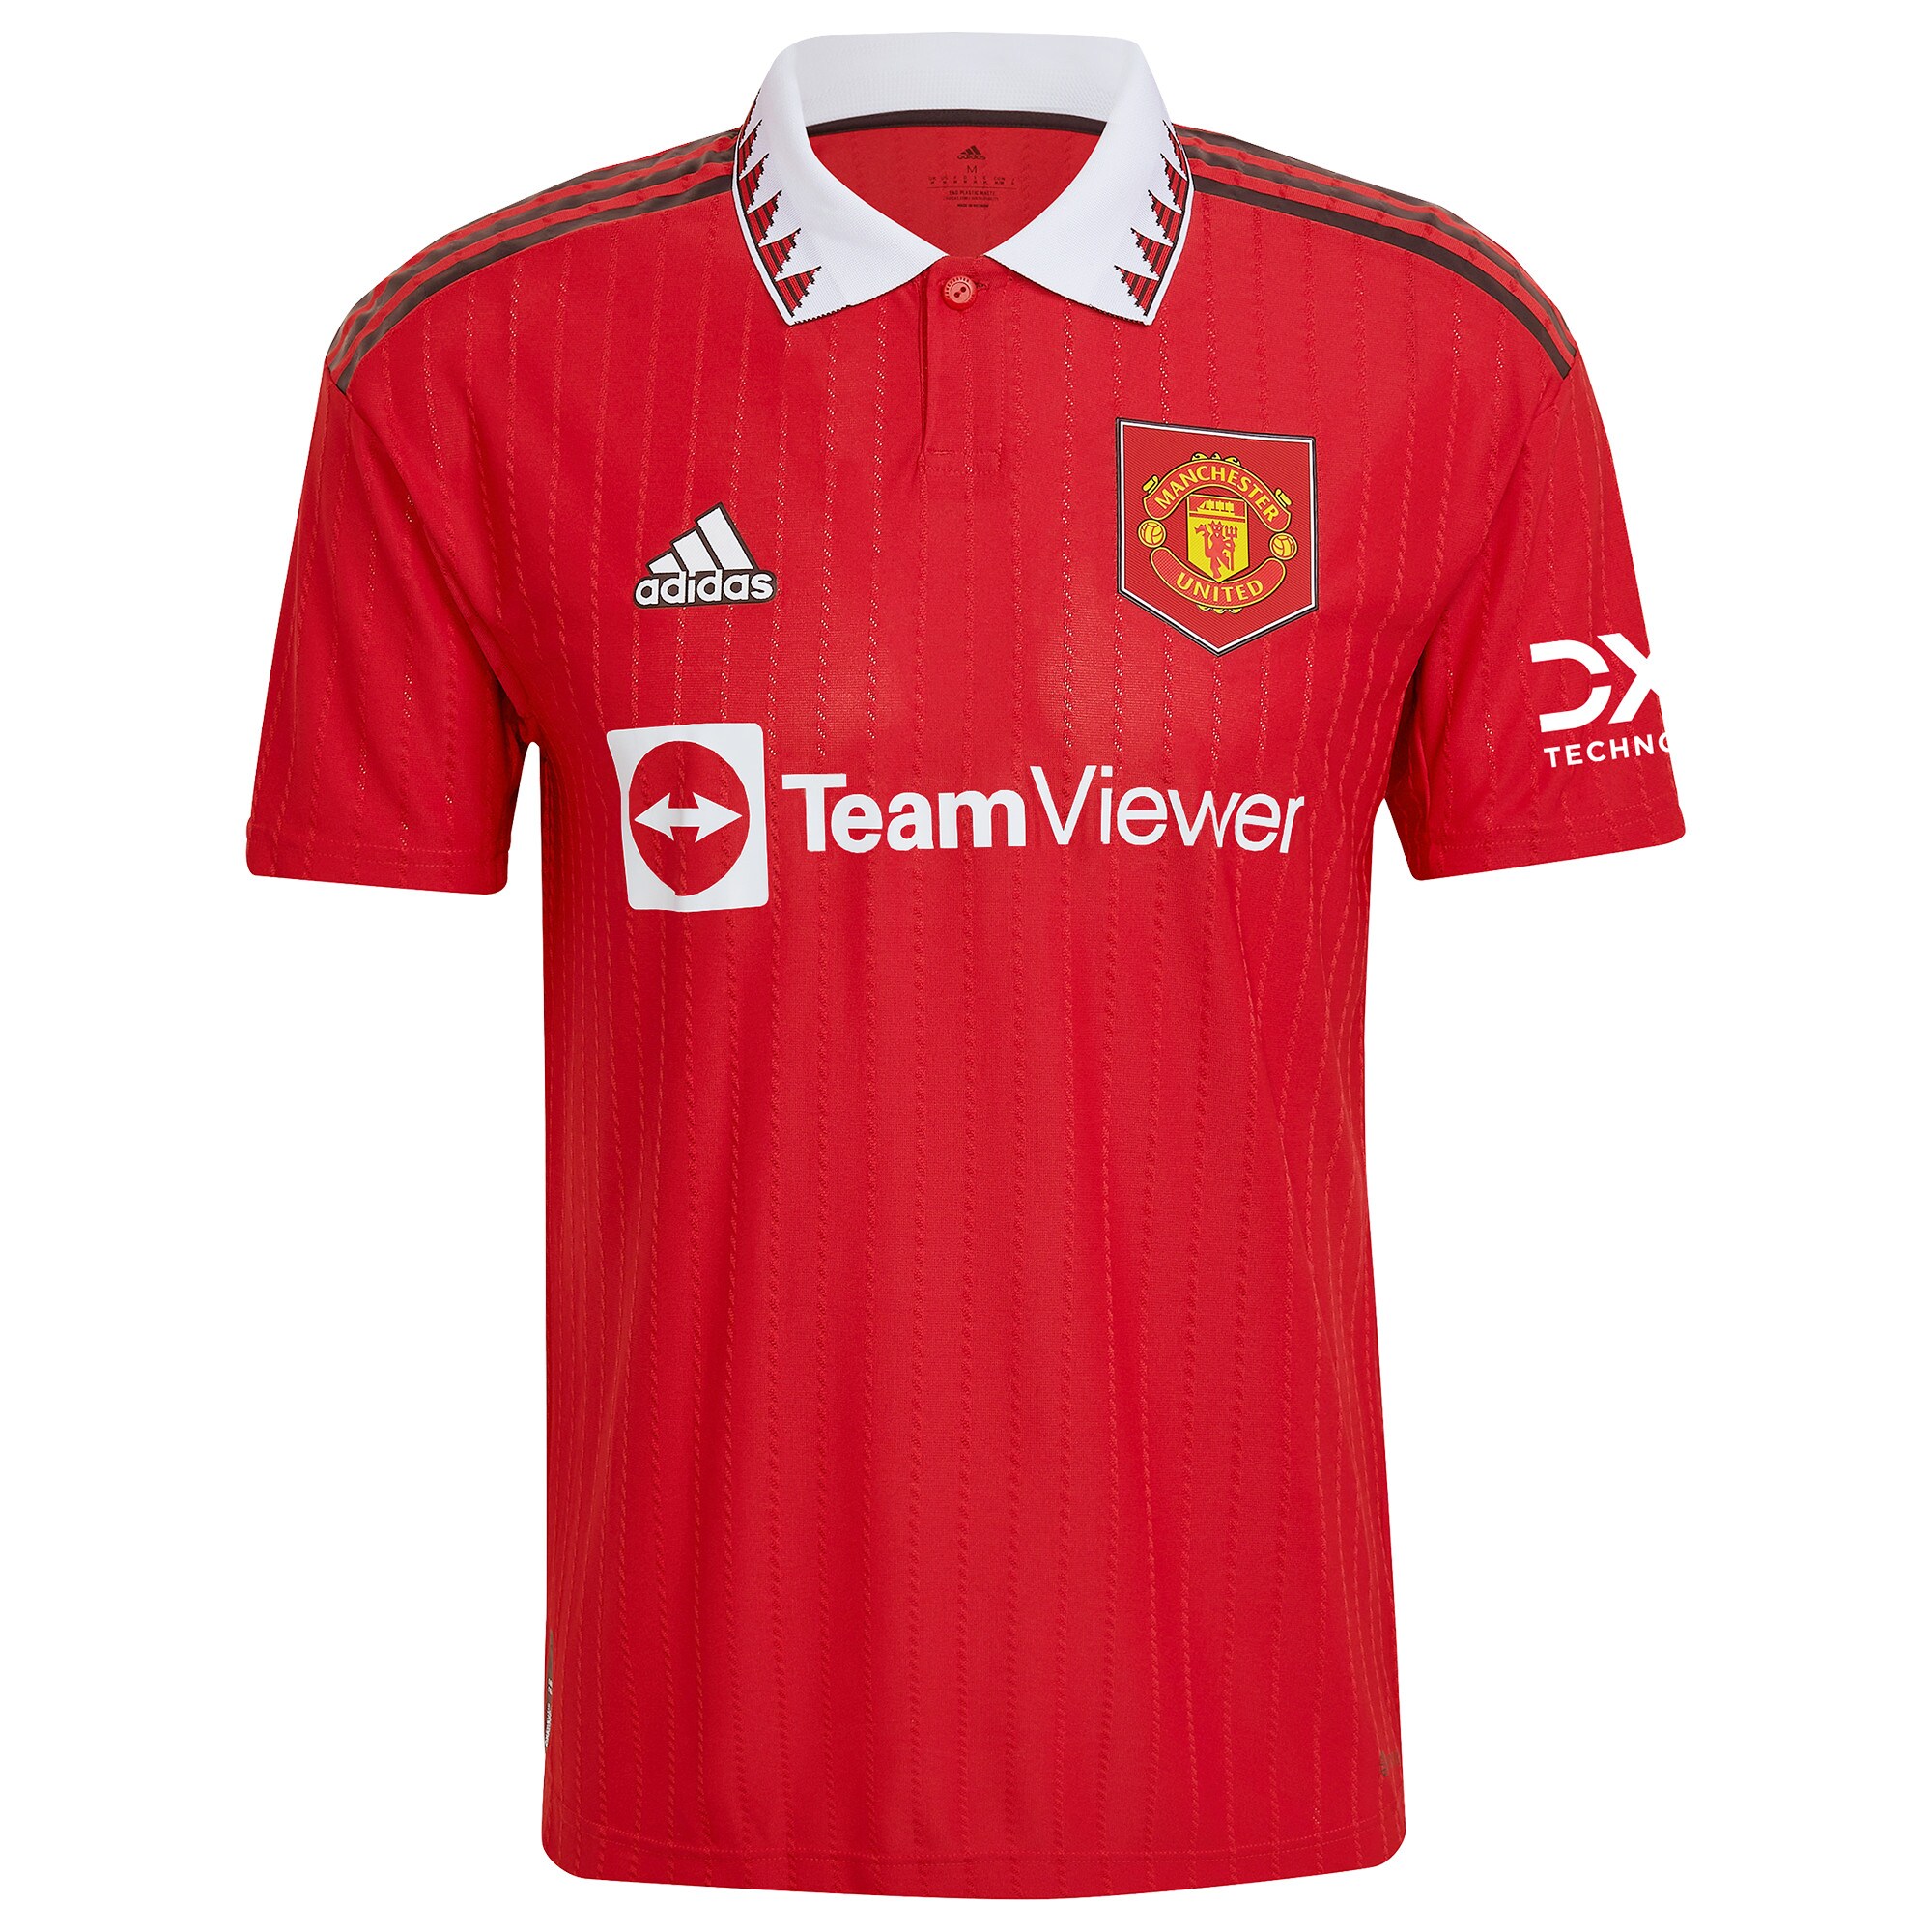 Manchester United Cup Home Authentic Shirt 2022-23 with B.Fernandes 8 printing